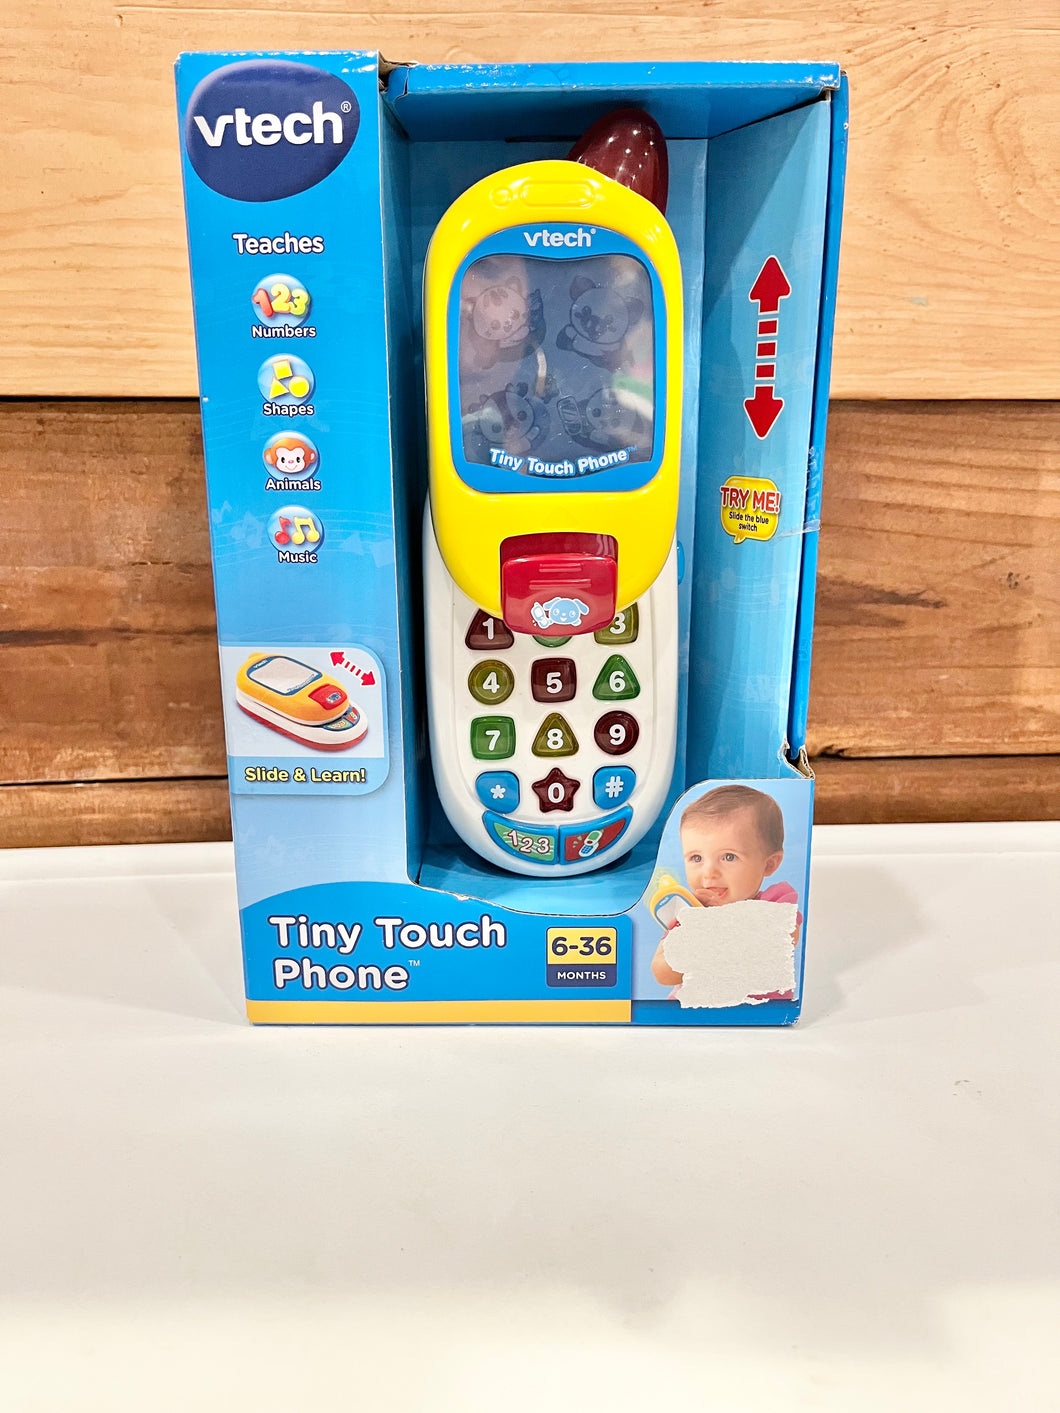 Vtech Tiny Touch Phone Toy